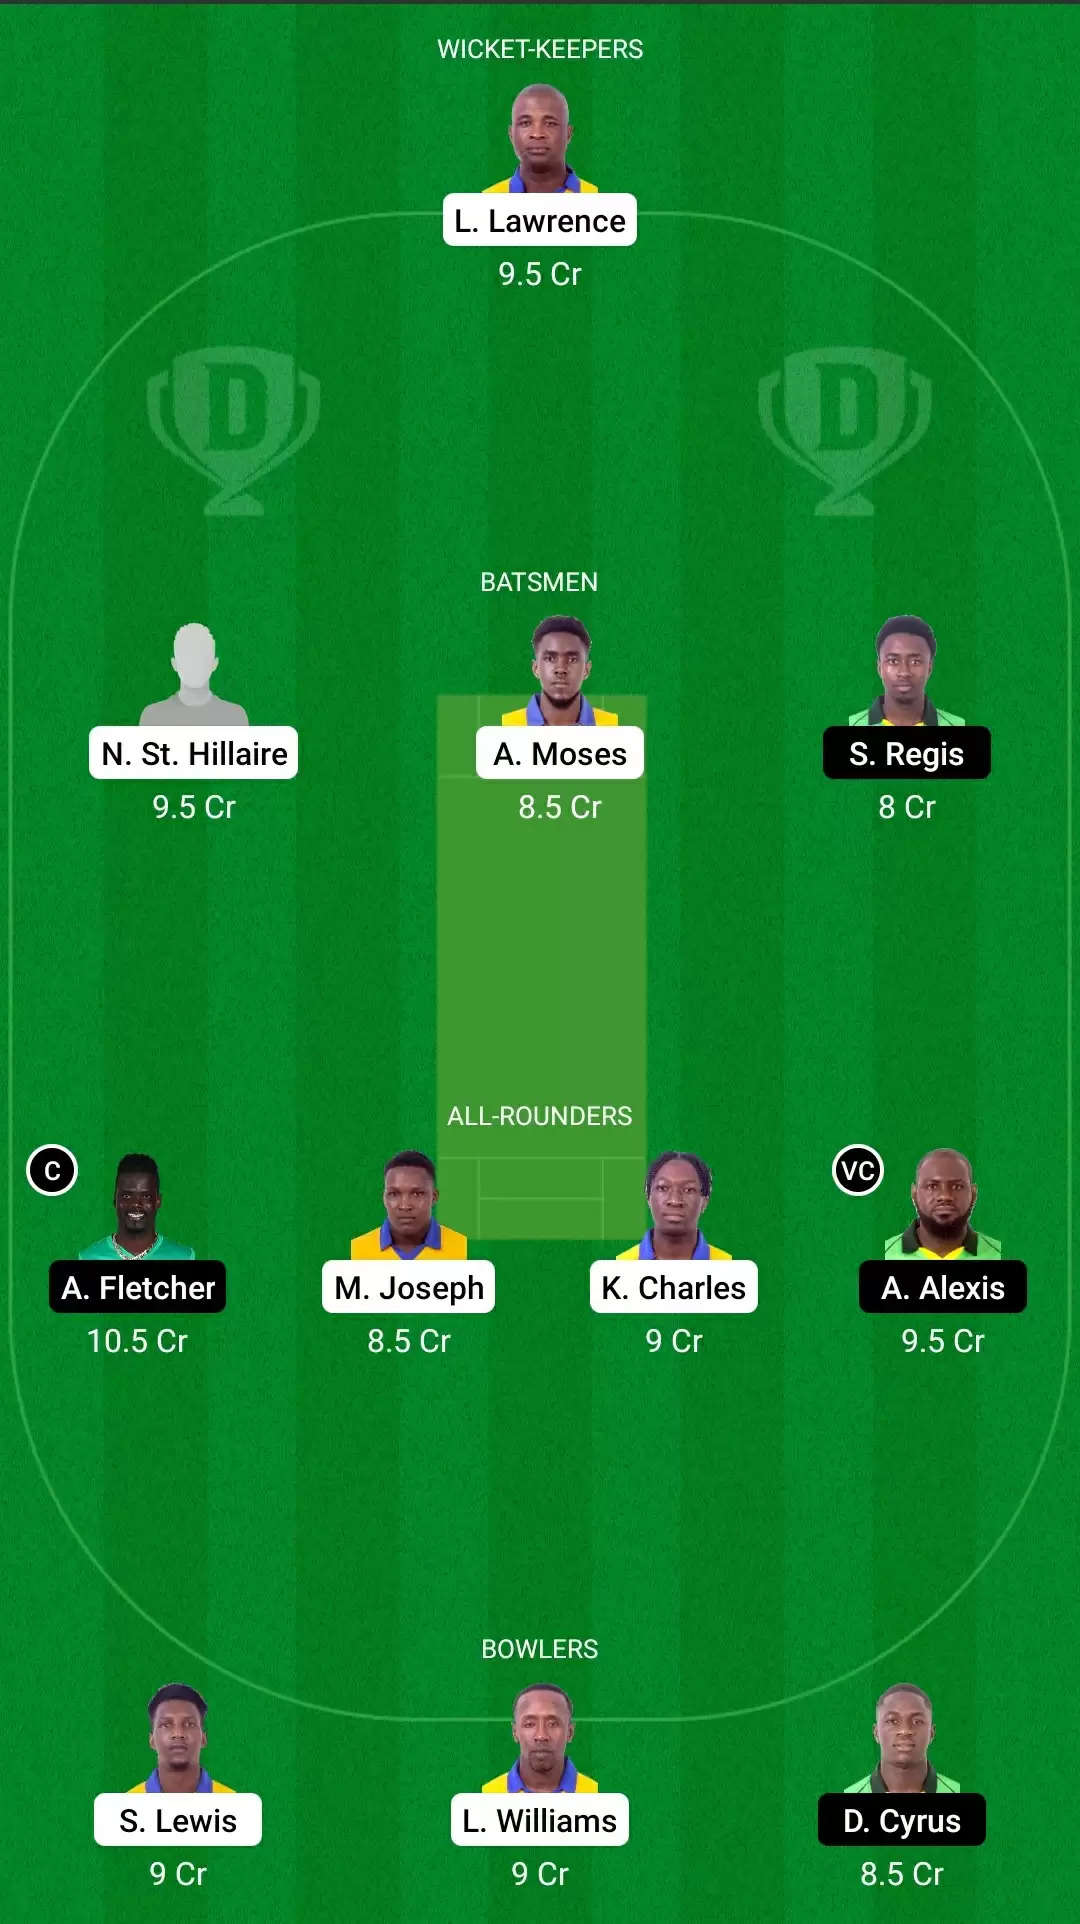 Spice Isle T10, 2021 | Match 21: SS vs NW Dream11 Prediction, Fantasy Cricket Tips, Team, Playing 11, Pitch Report, Weather Conditions and Injury Update for Saffron Strikers vs Nutmeg Warriors